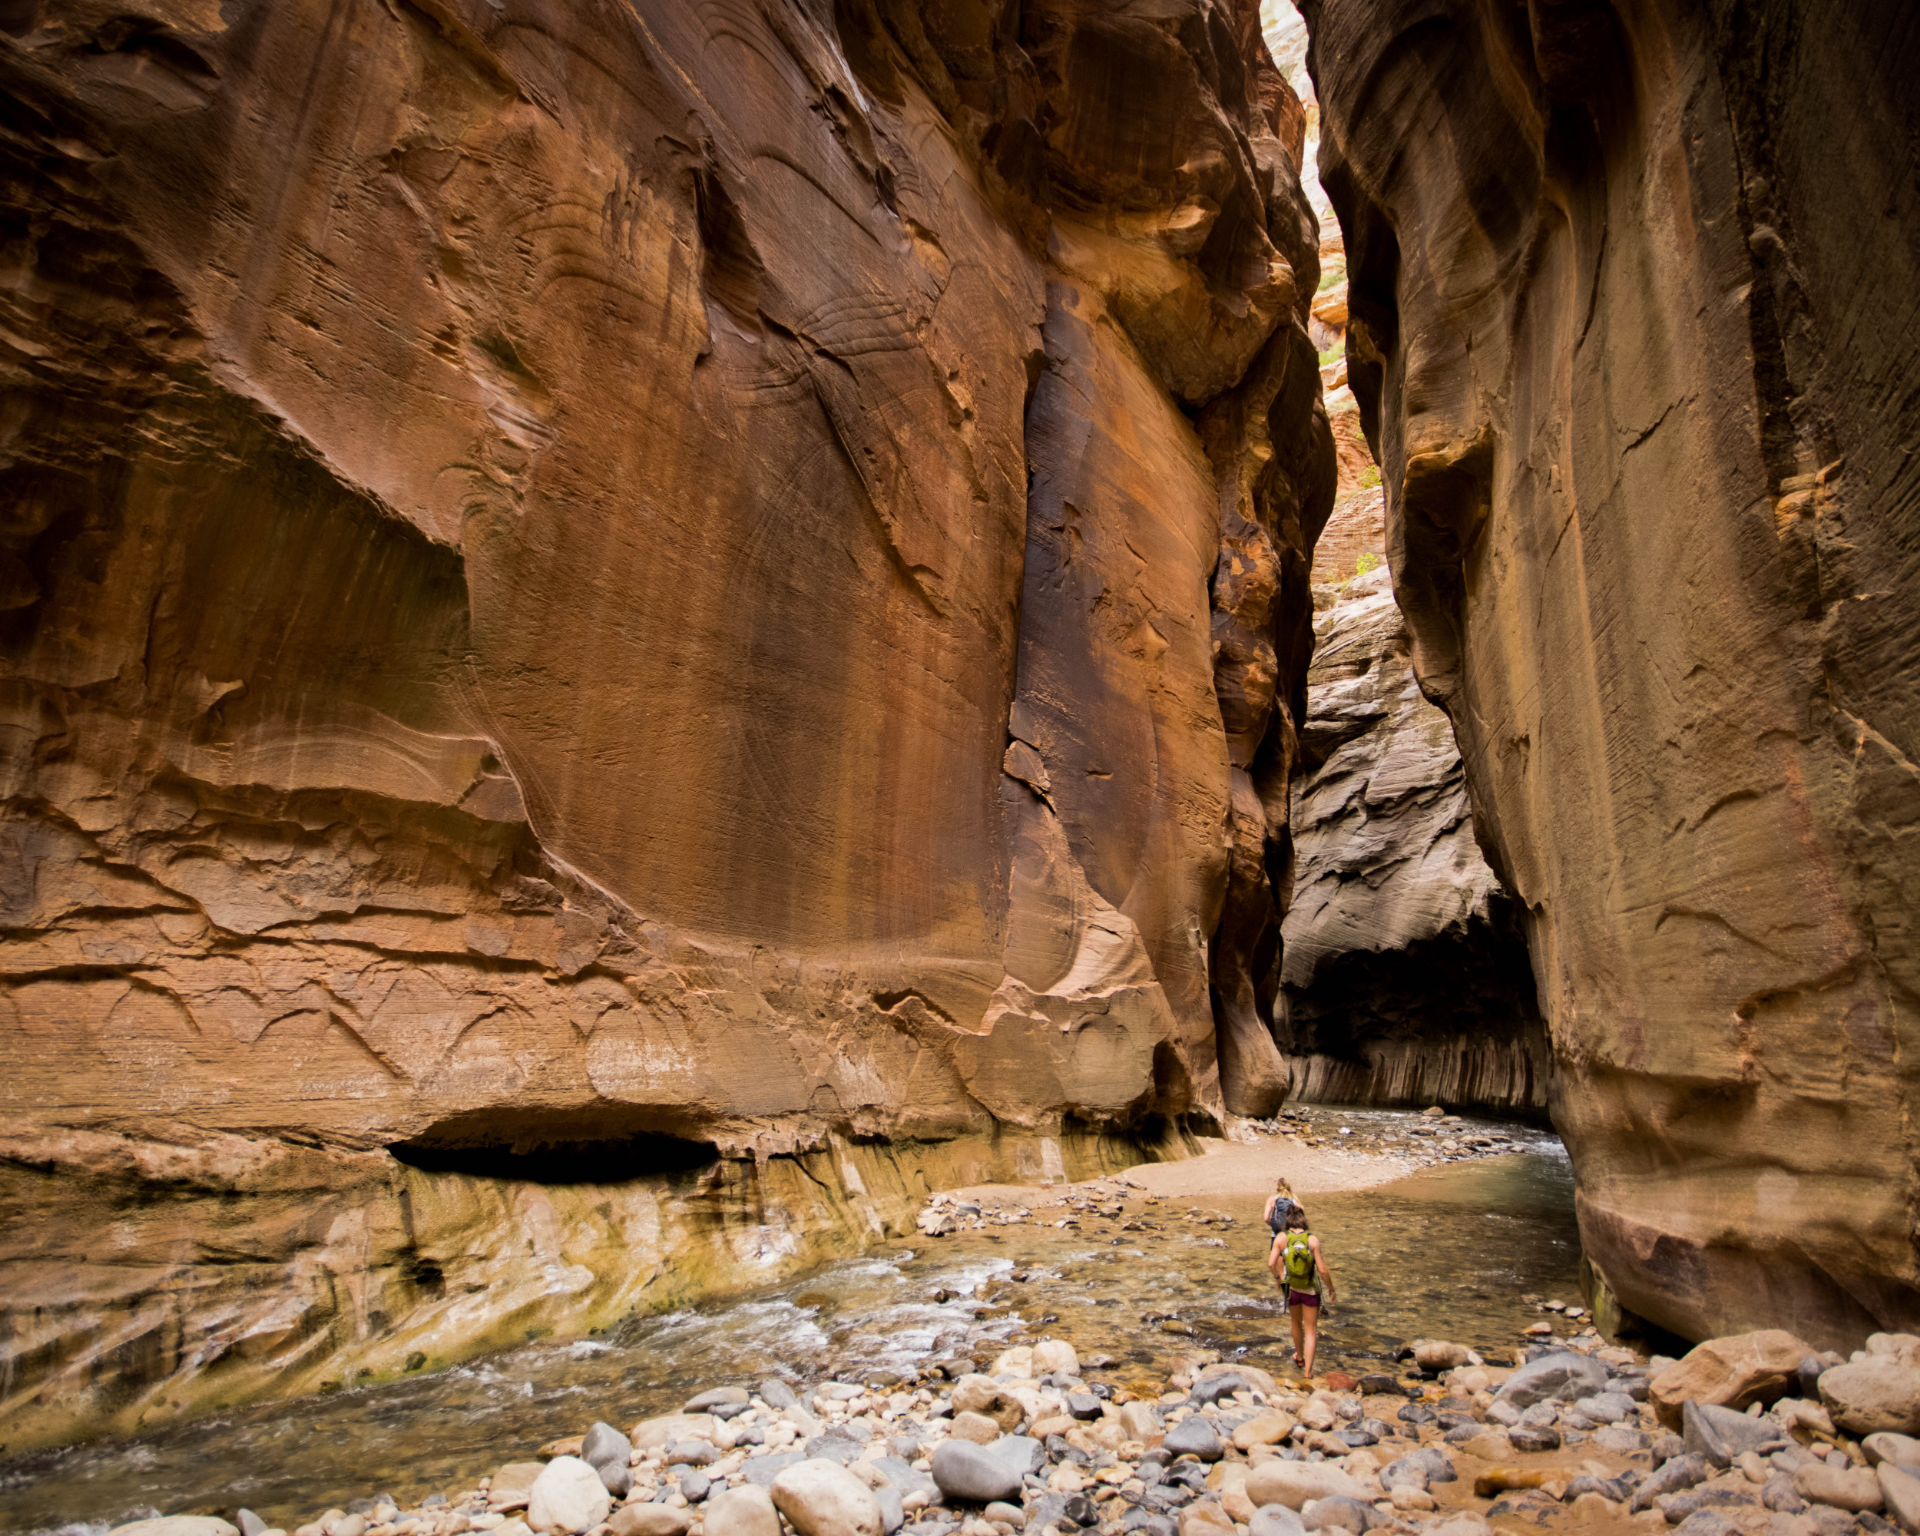 Hiking in The Narrows at Zion National Park.